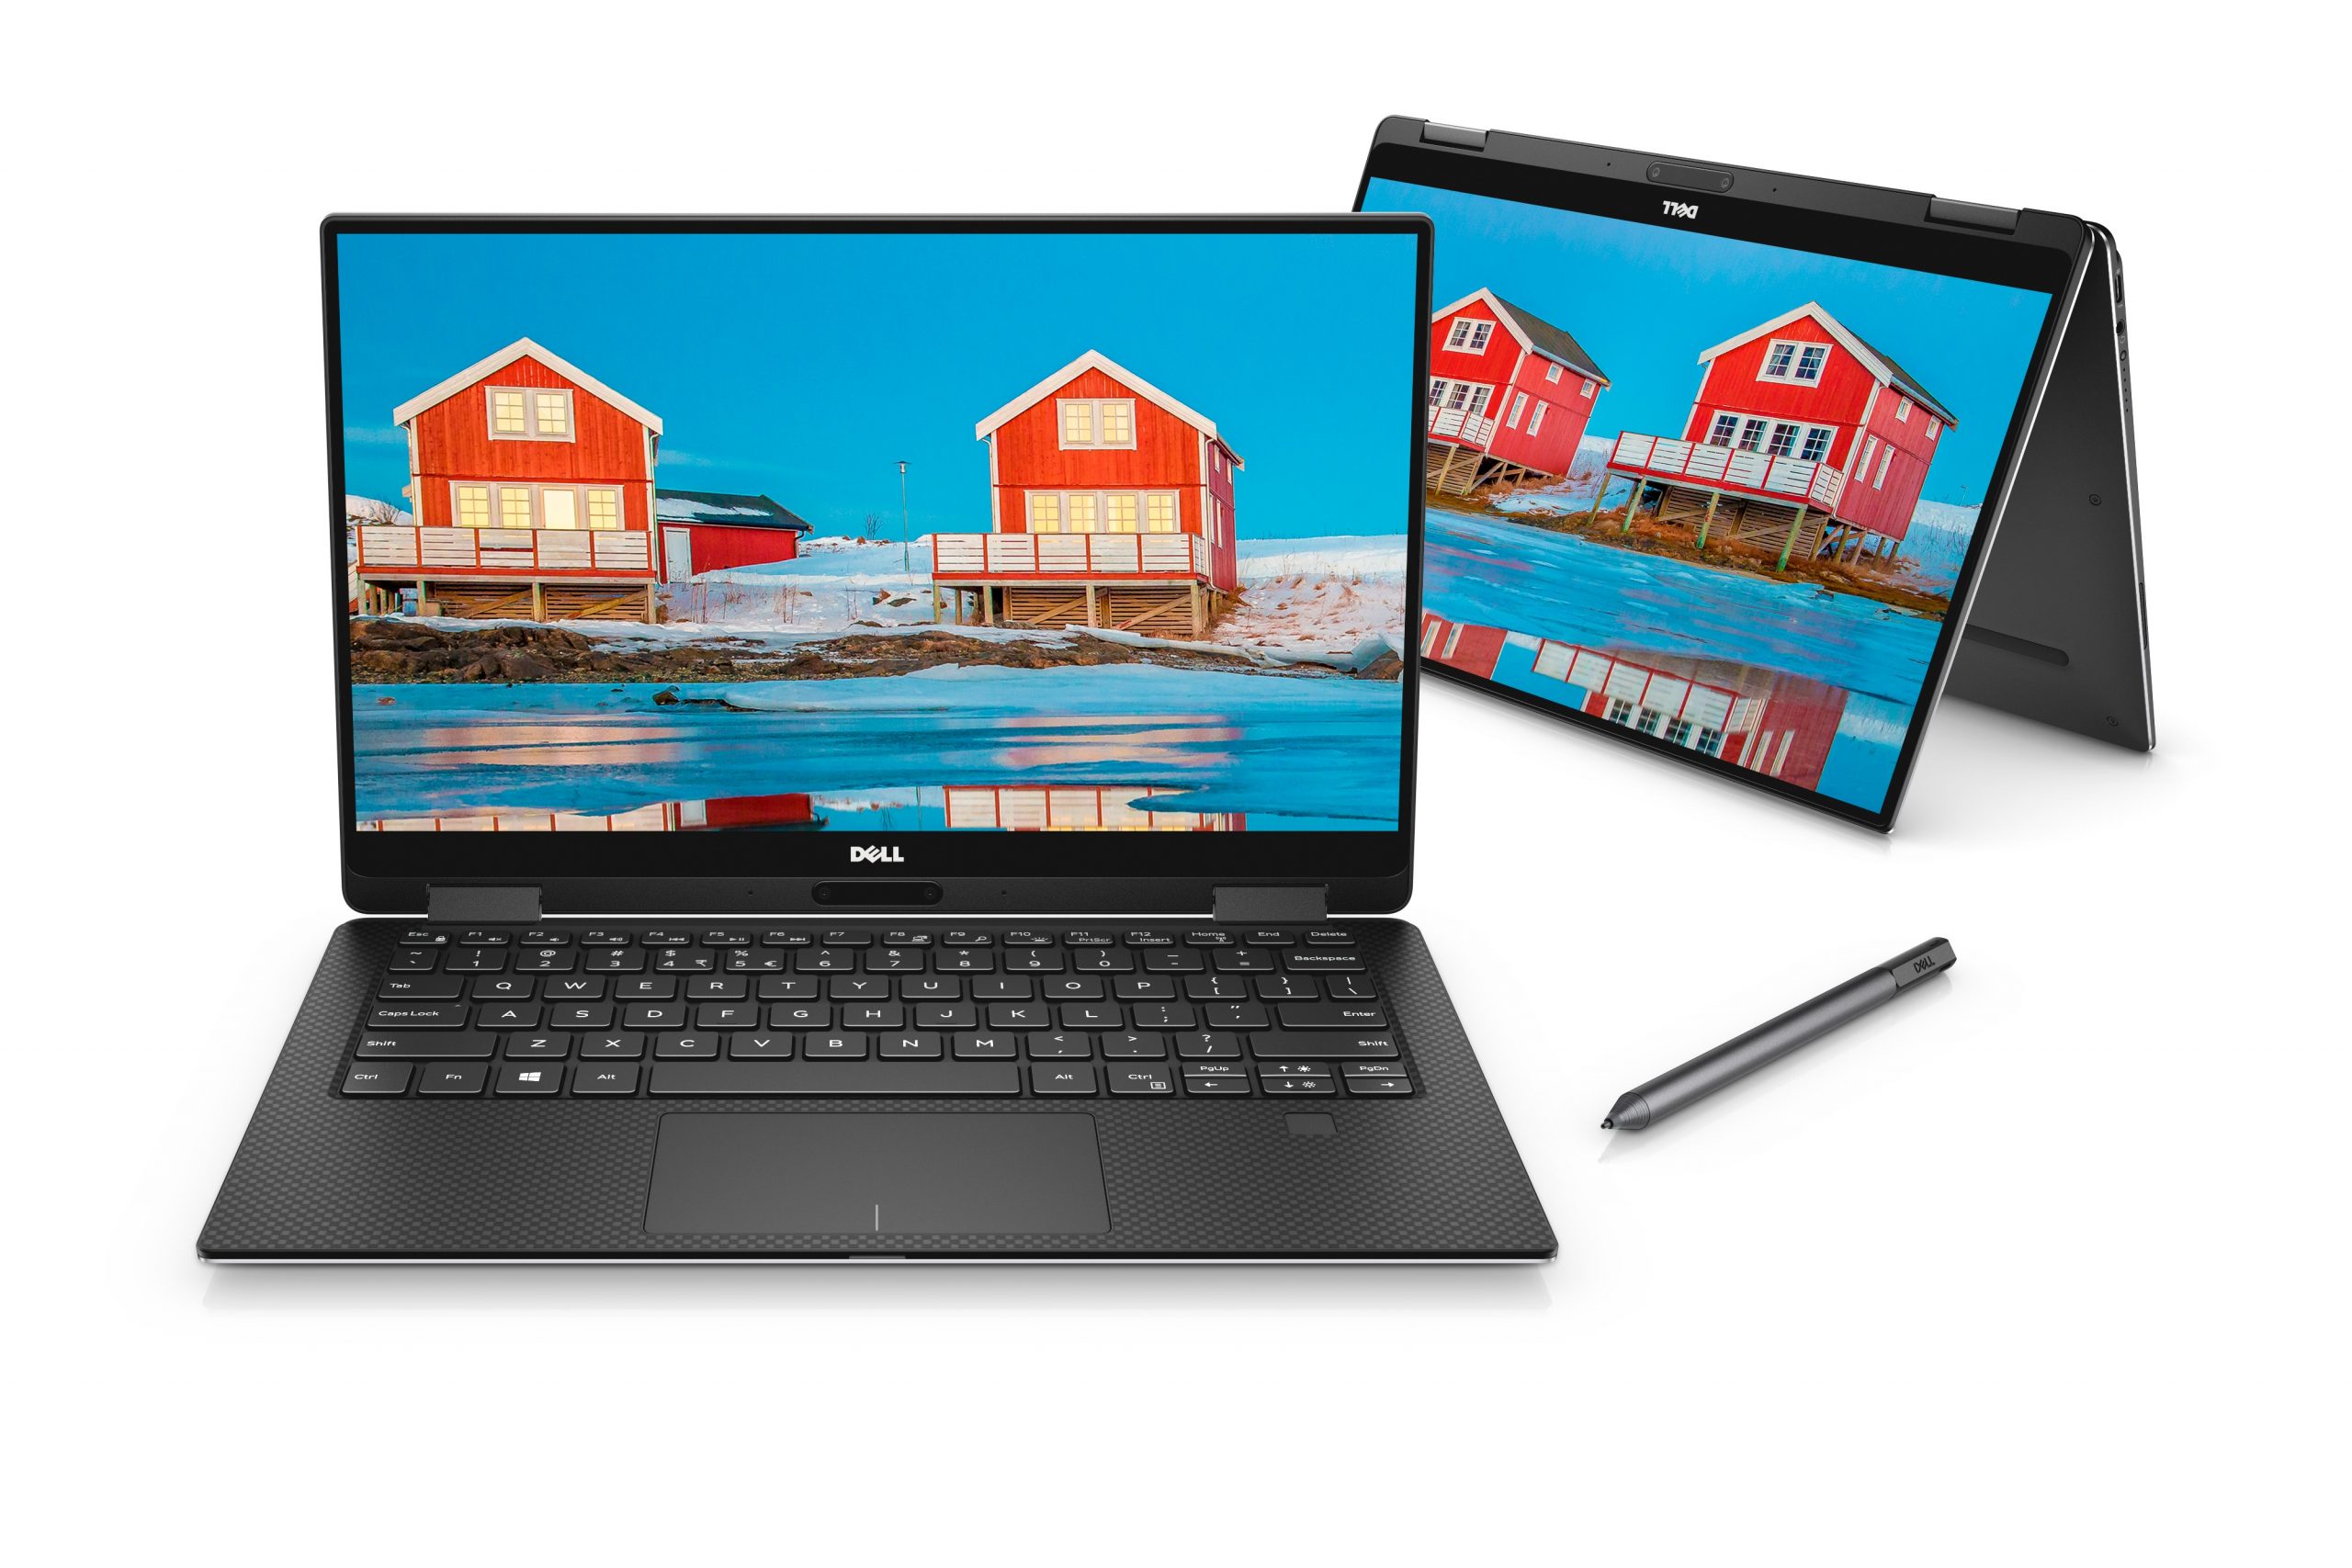 Hands on with the Dell XPS 13 2-in-1 hybrid